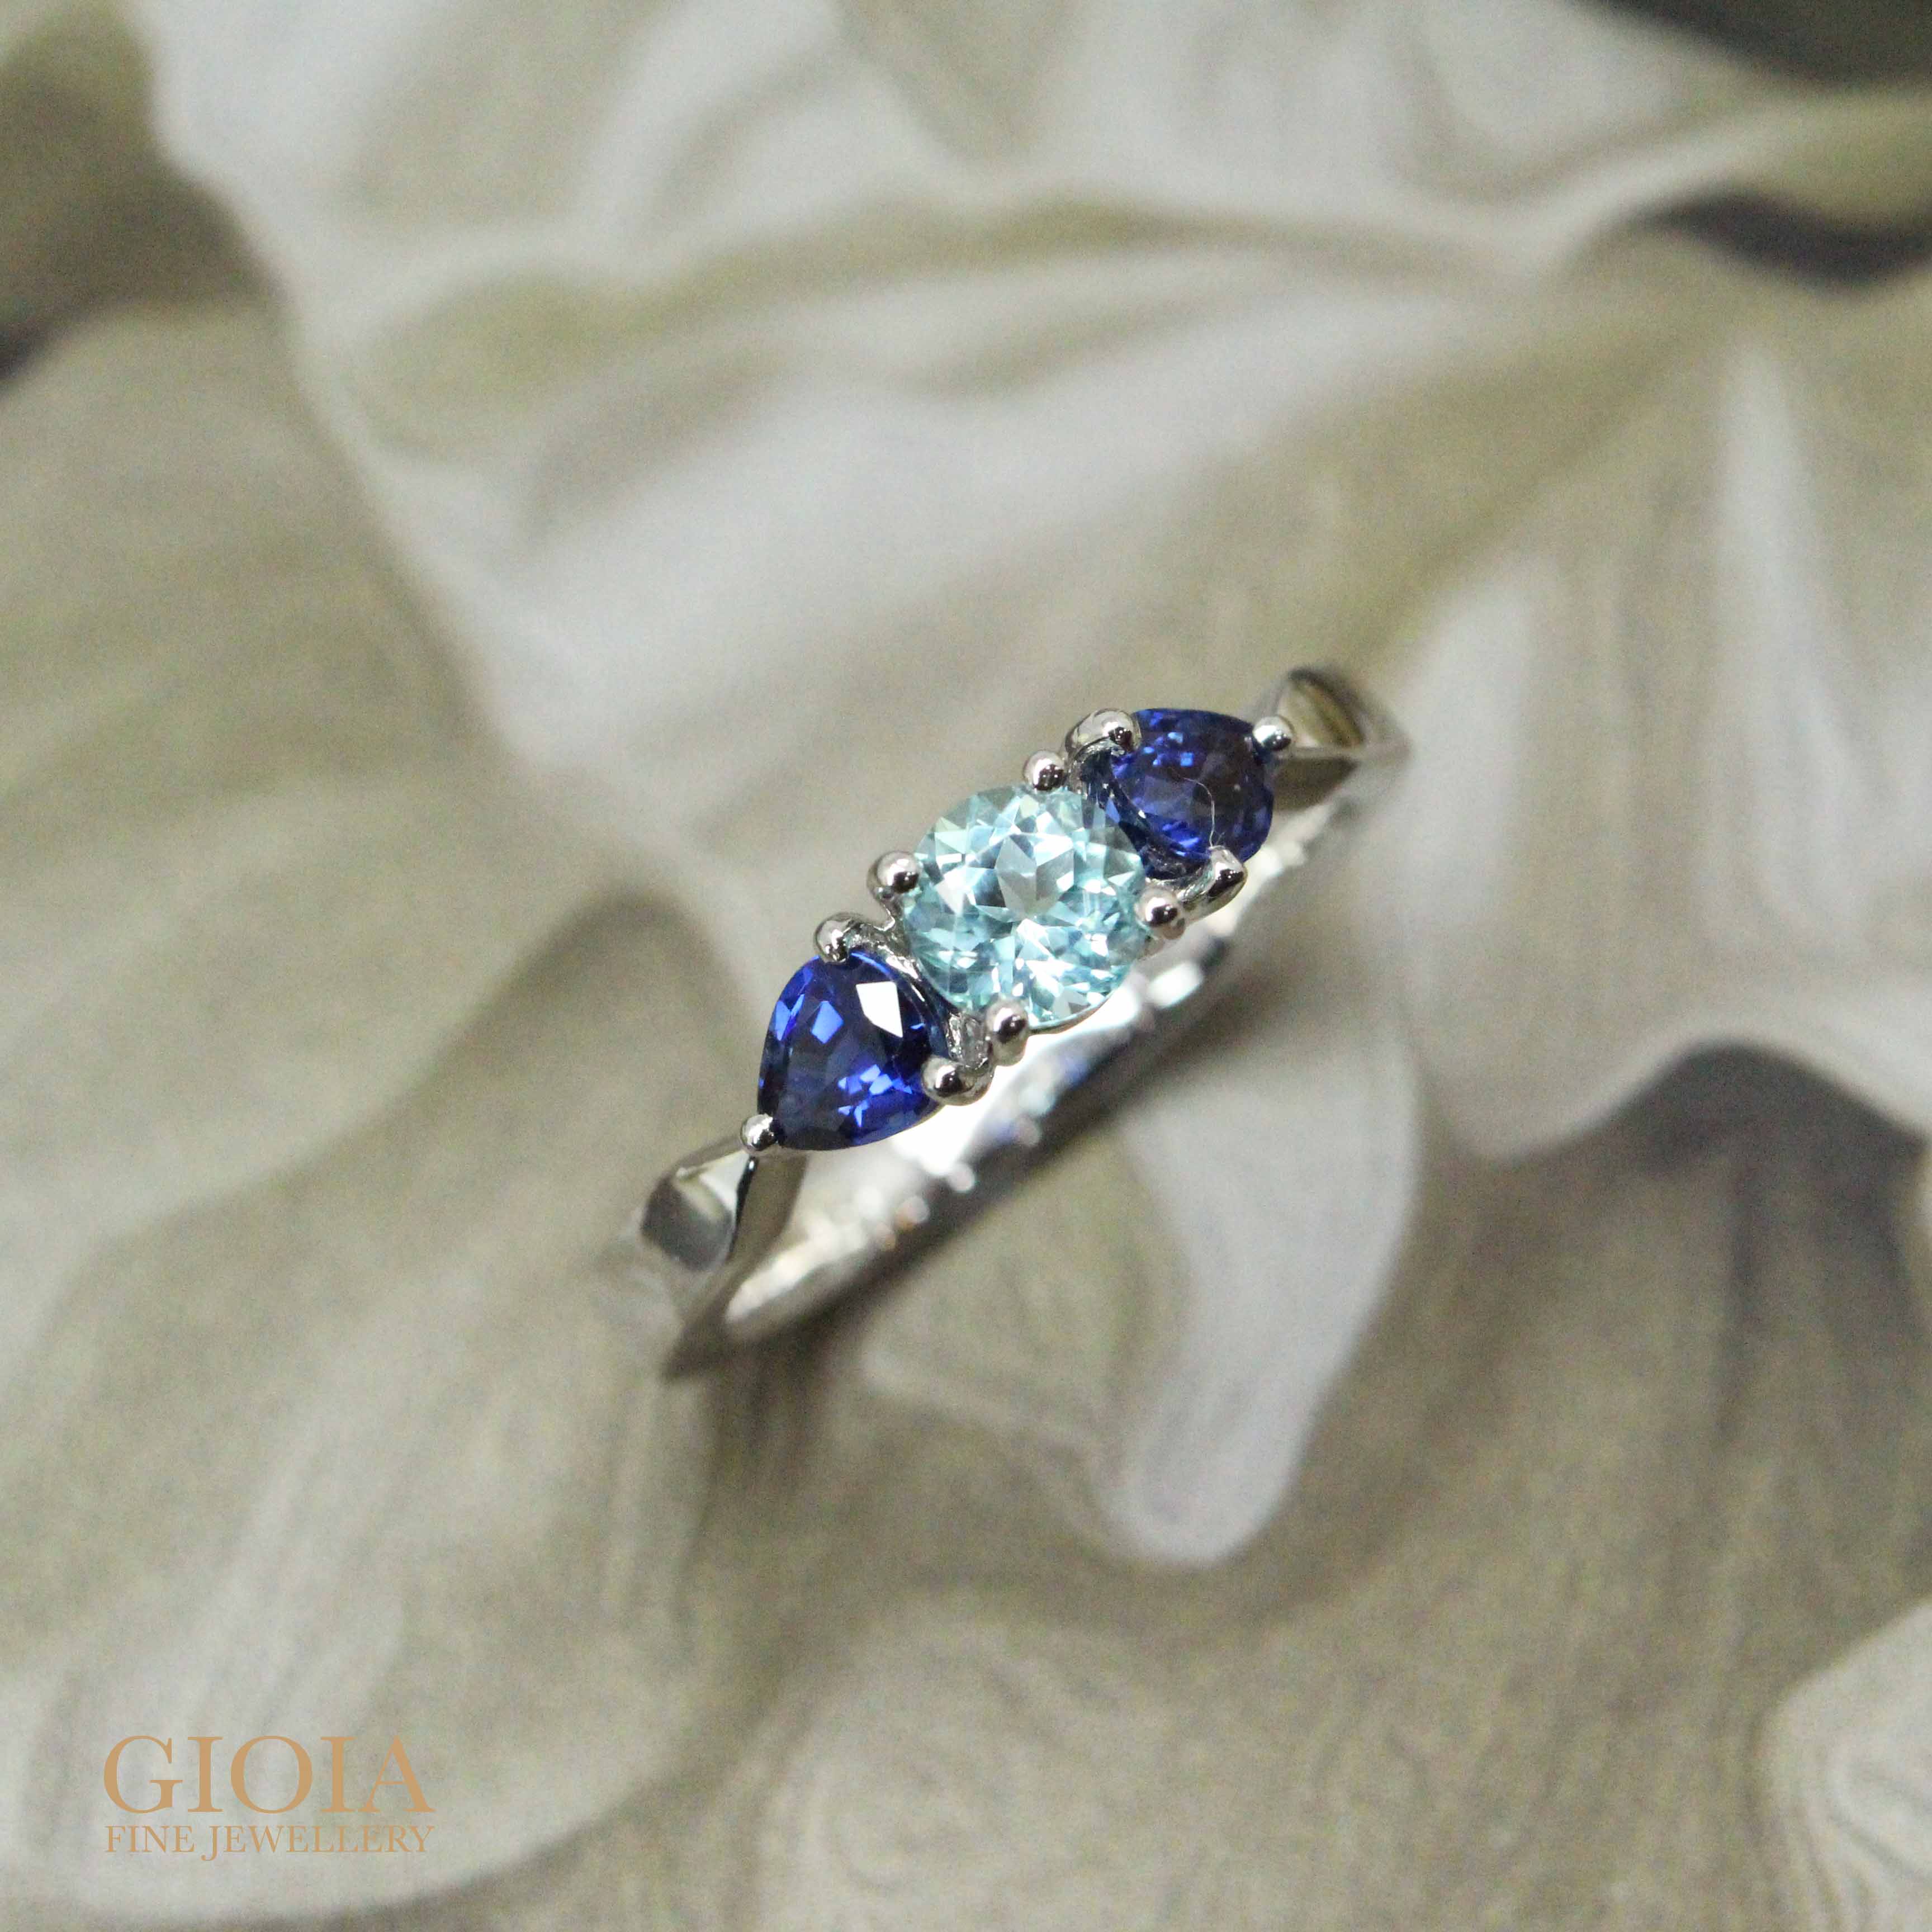 Bespoke Engagement Ring can be custom made to all design. Coloured gemstones can range from blue Sapphire to paraiba tourmaline. GIOIA Fine Jewellery